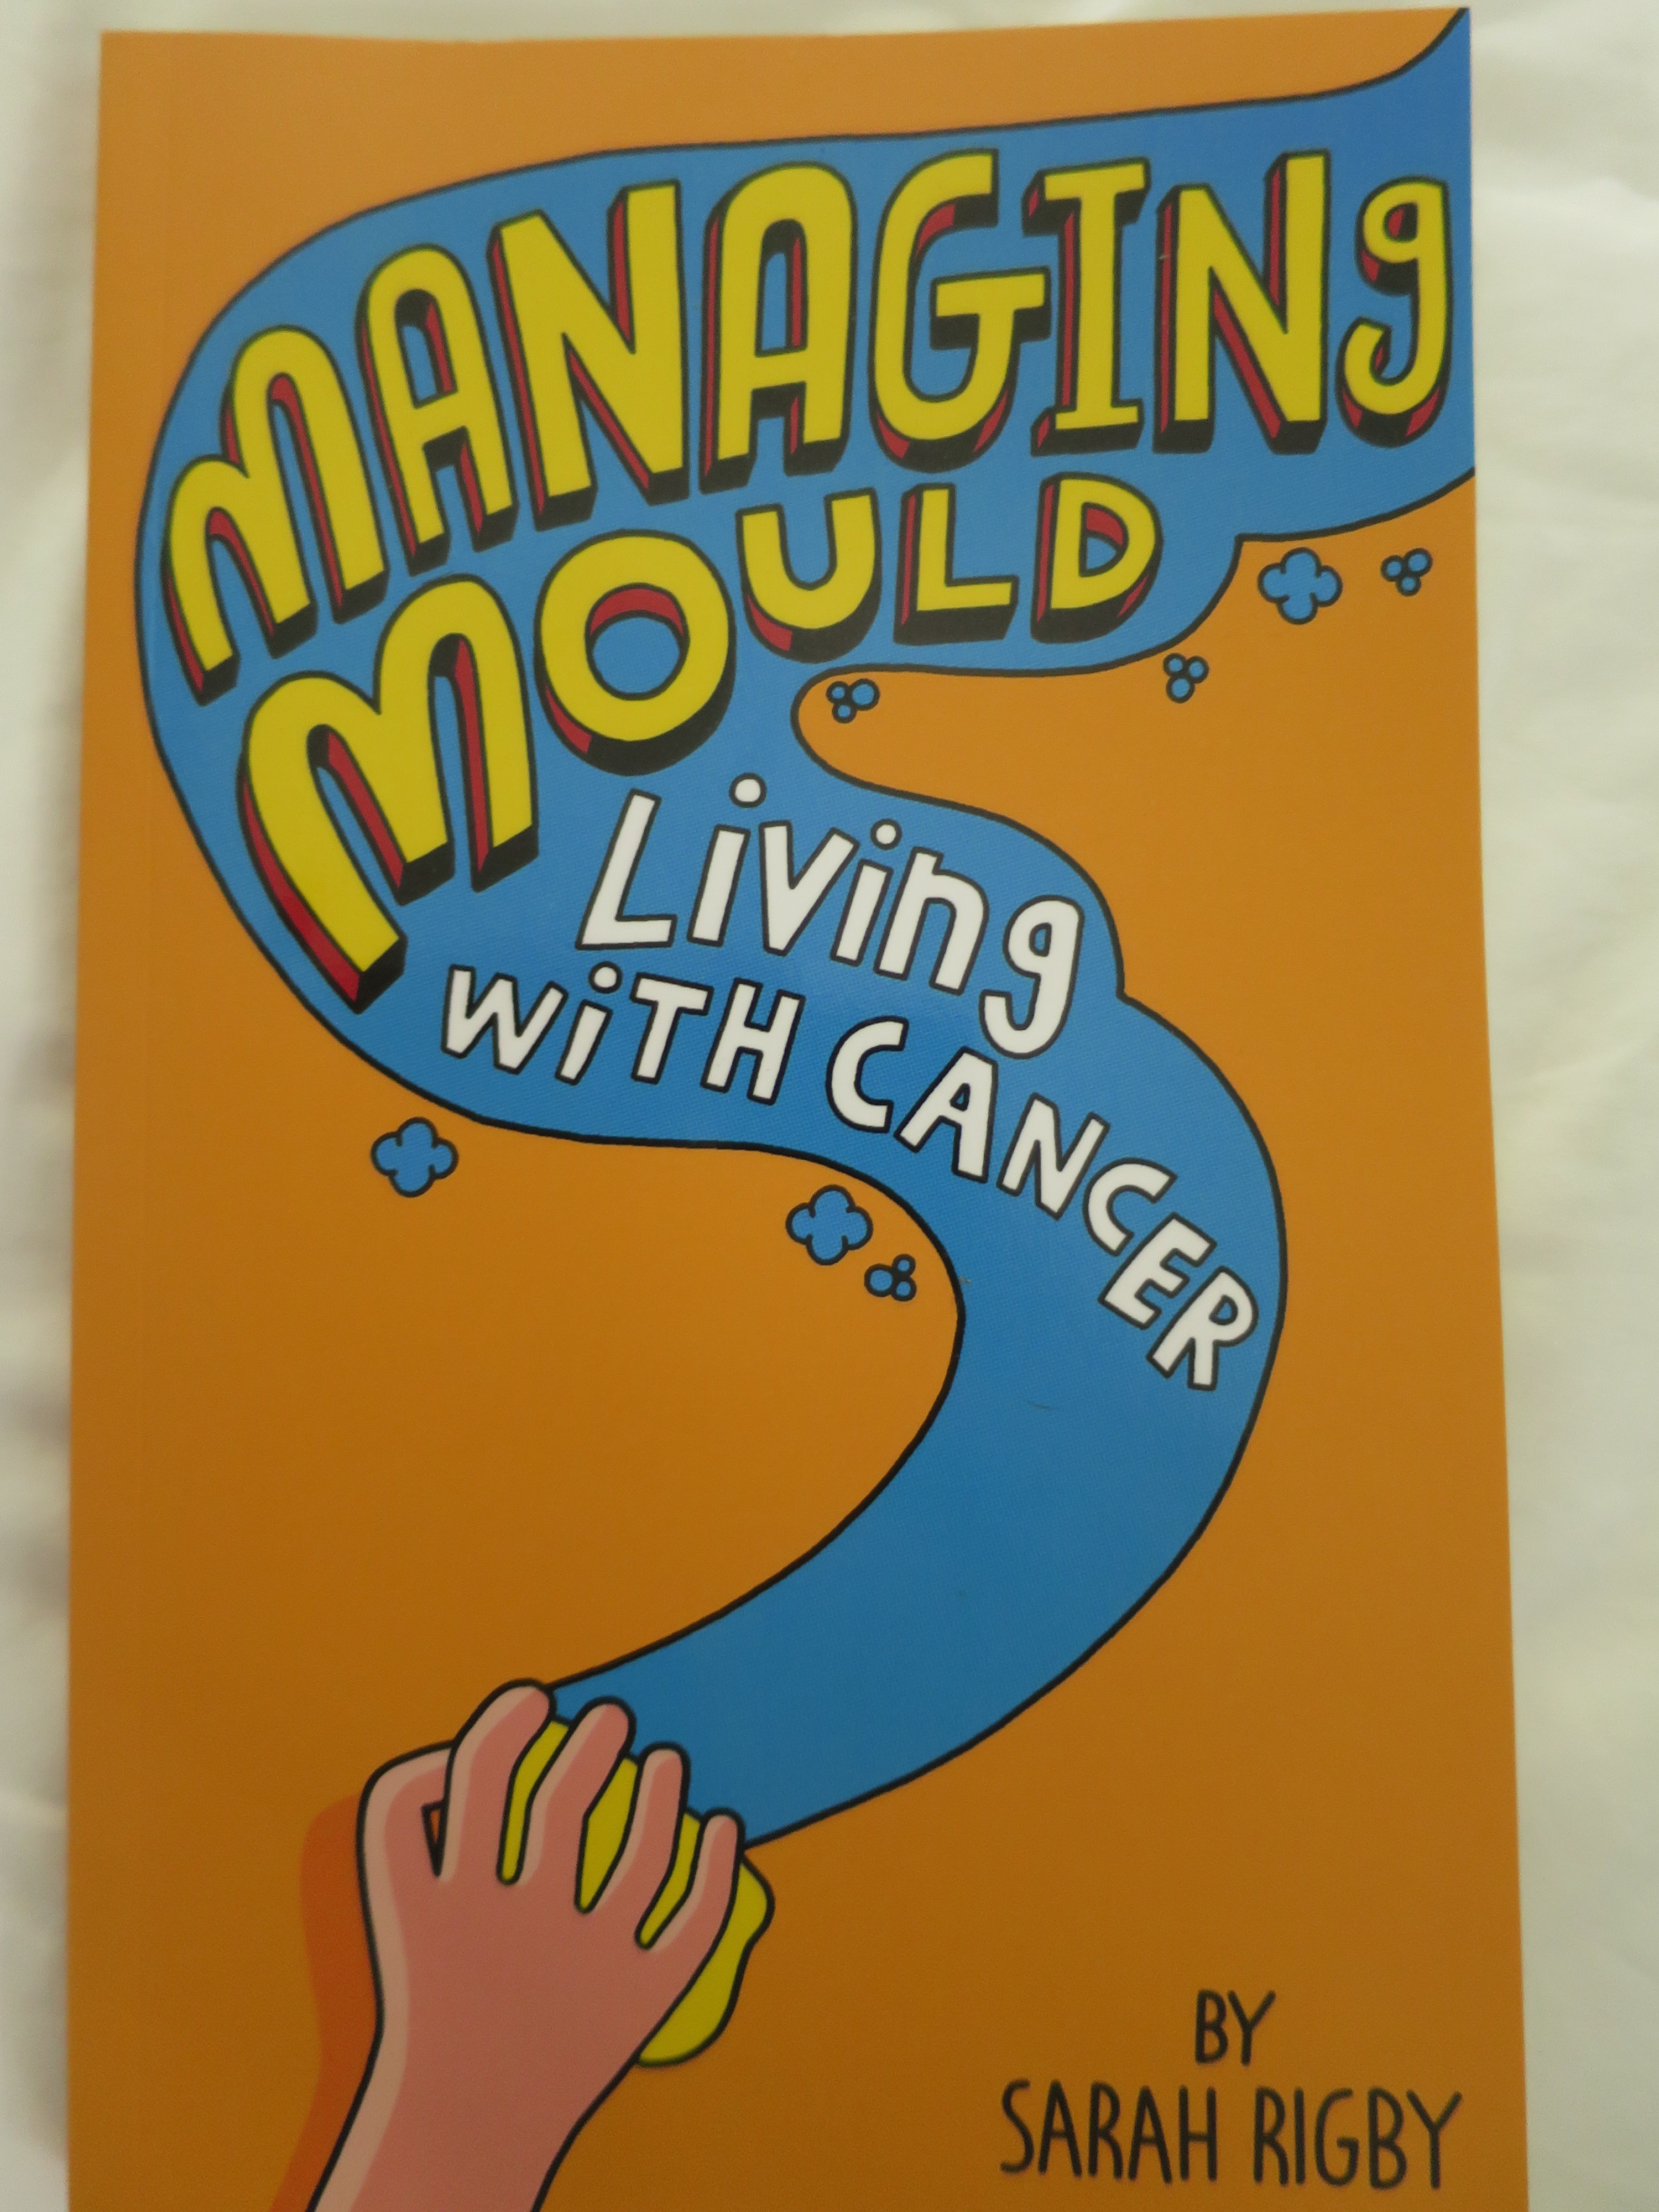 managing mould living with cancer